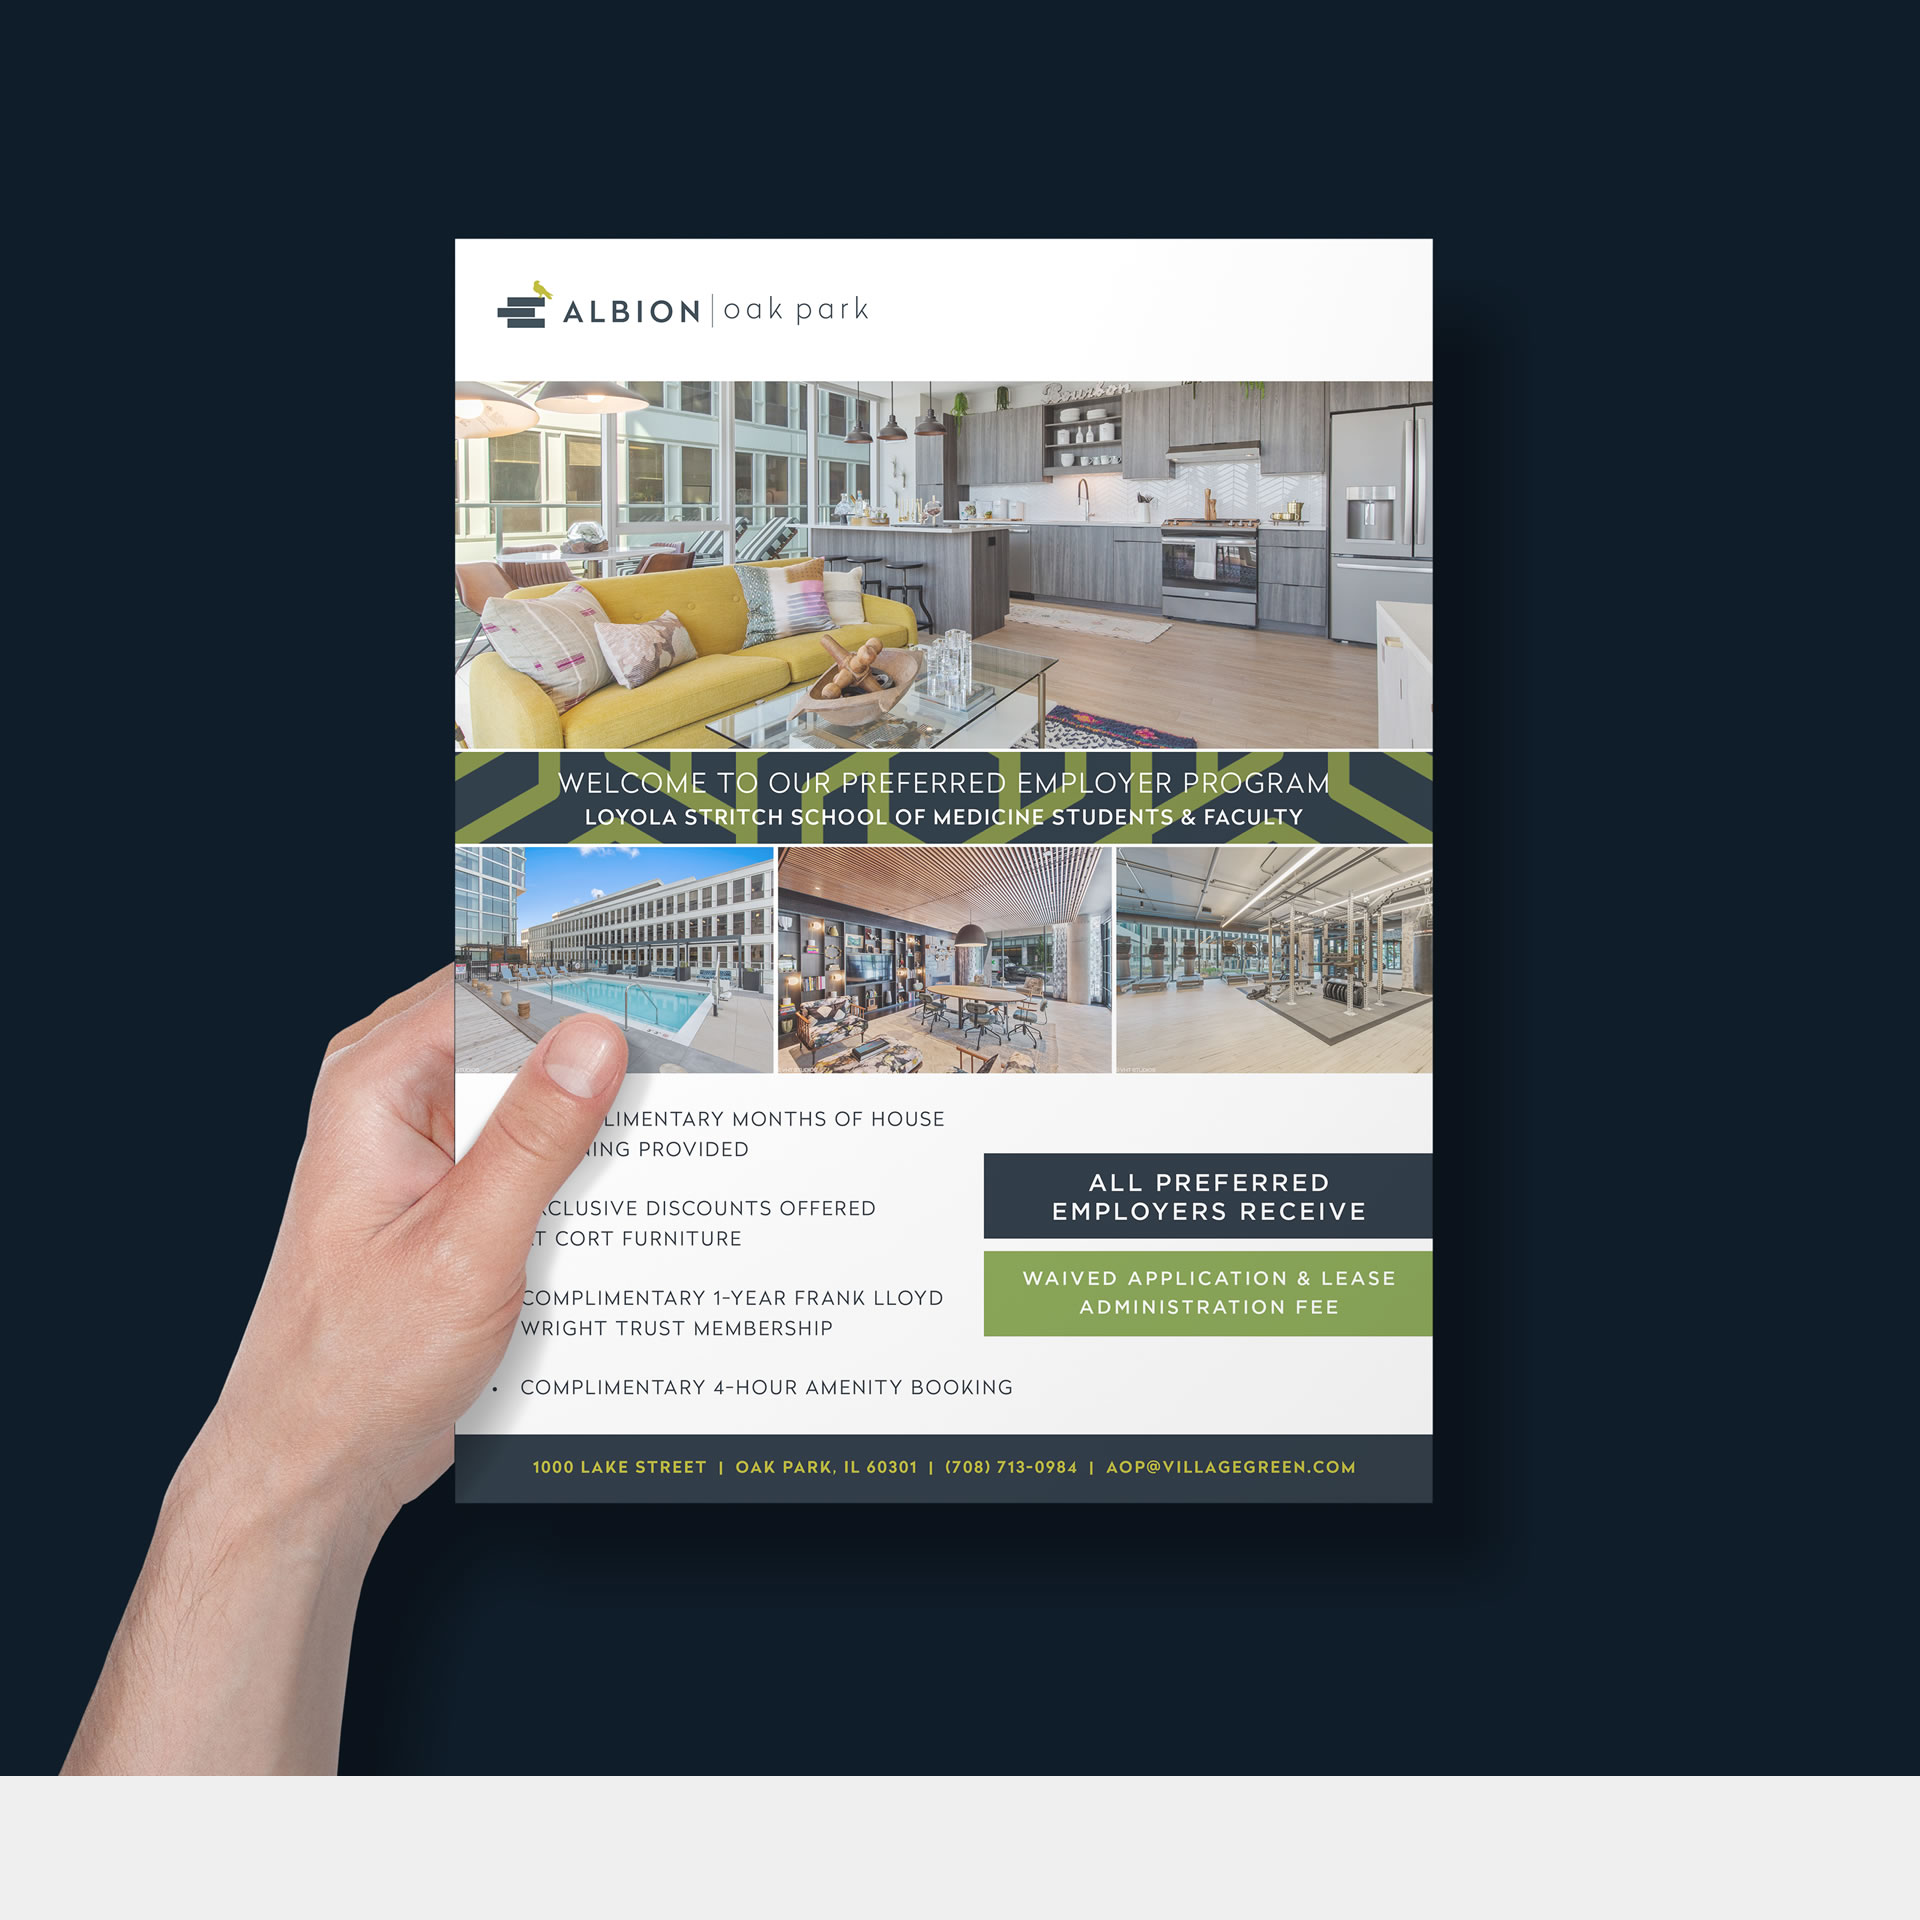 Greenworks Studio Real Estate Marketing Agency Featuring Our Work of Interior Design and Branding for Albion Oak Park 